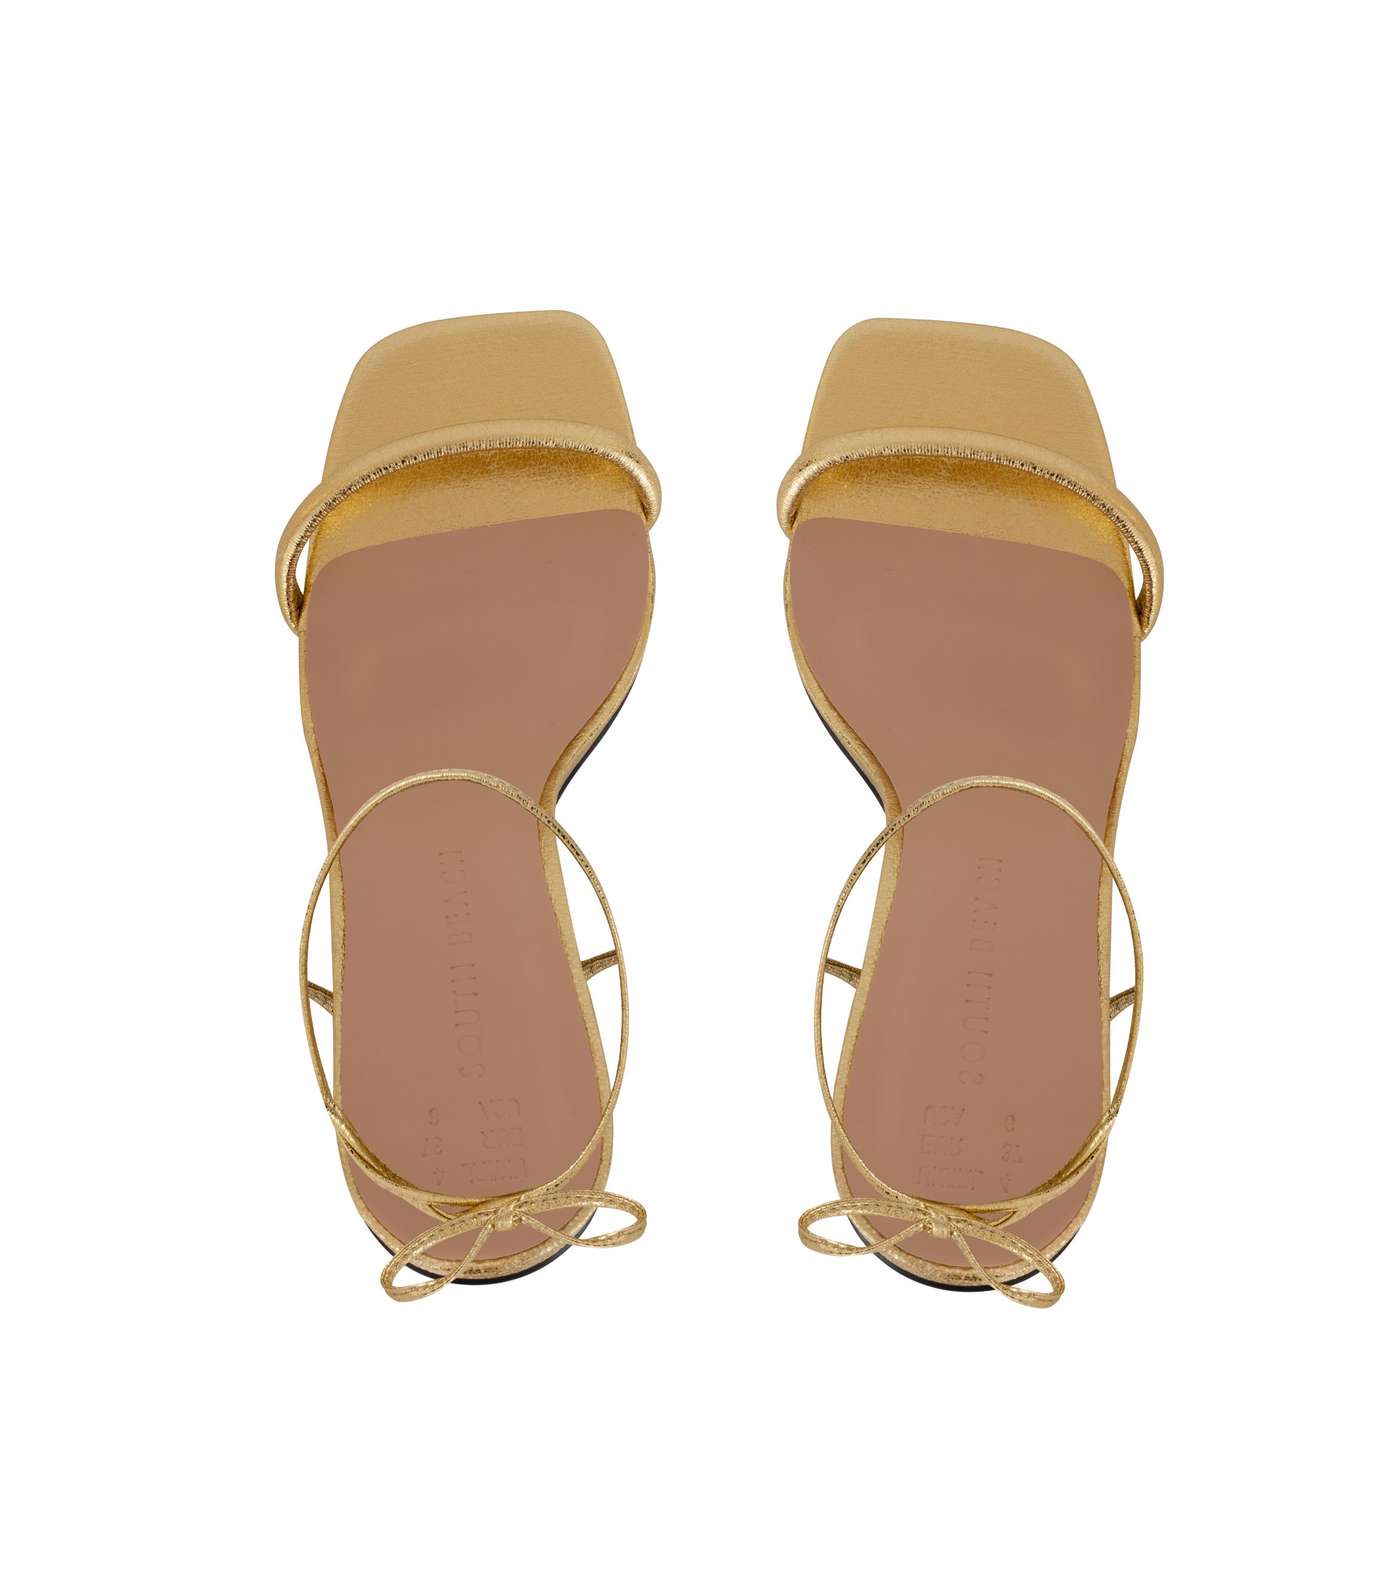 South Beach Gold Tie Faux Bamboo Heel Sandals Image 4